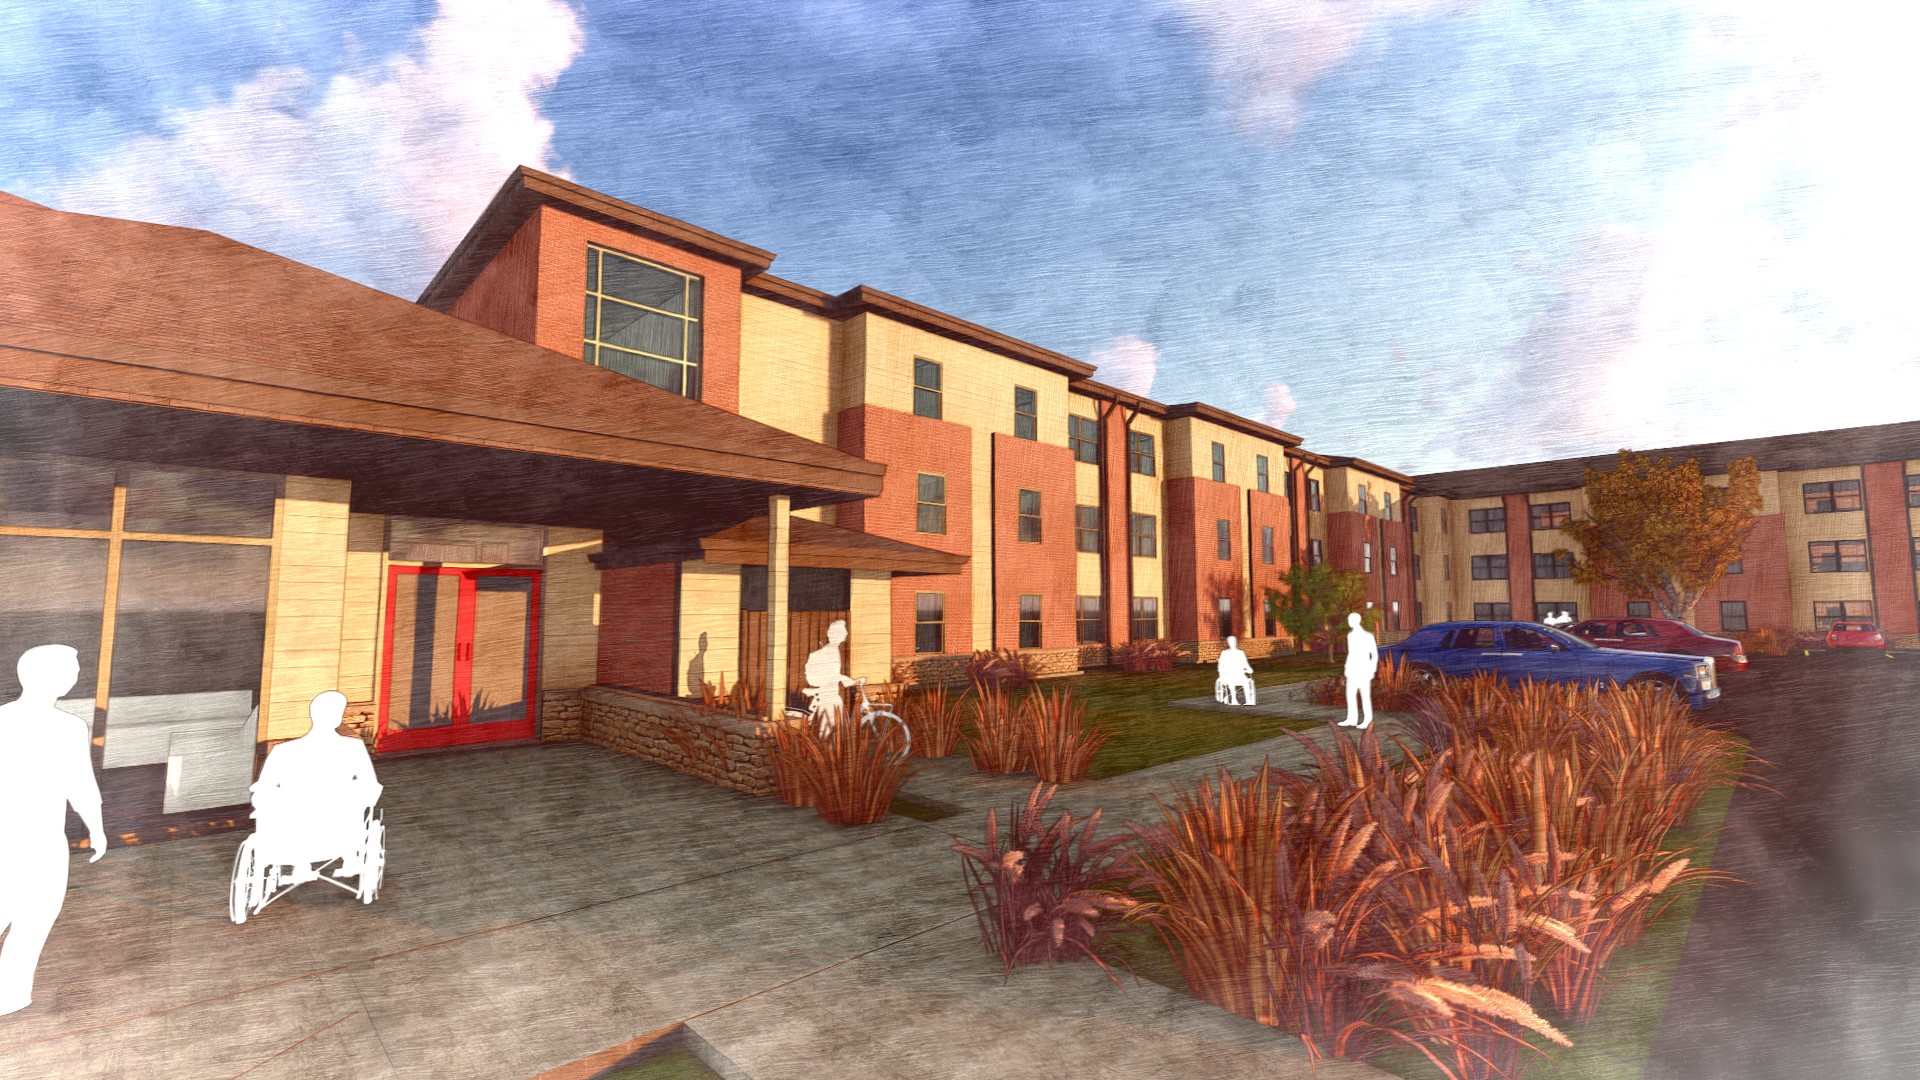 A Safe Haven Foundation Announces Groundbreaking Ceremony for 75 Apartments for Military Veterans in Hobart, Indiana